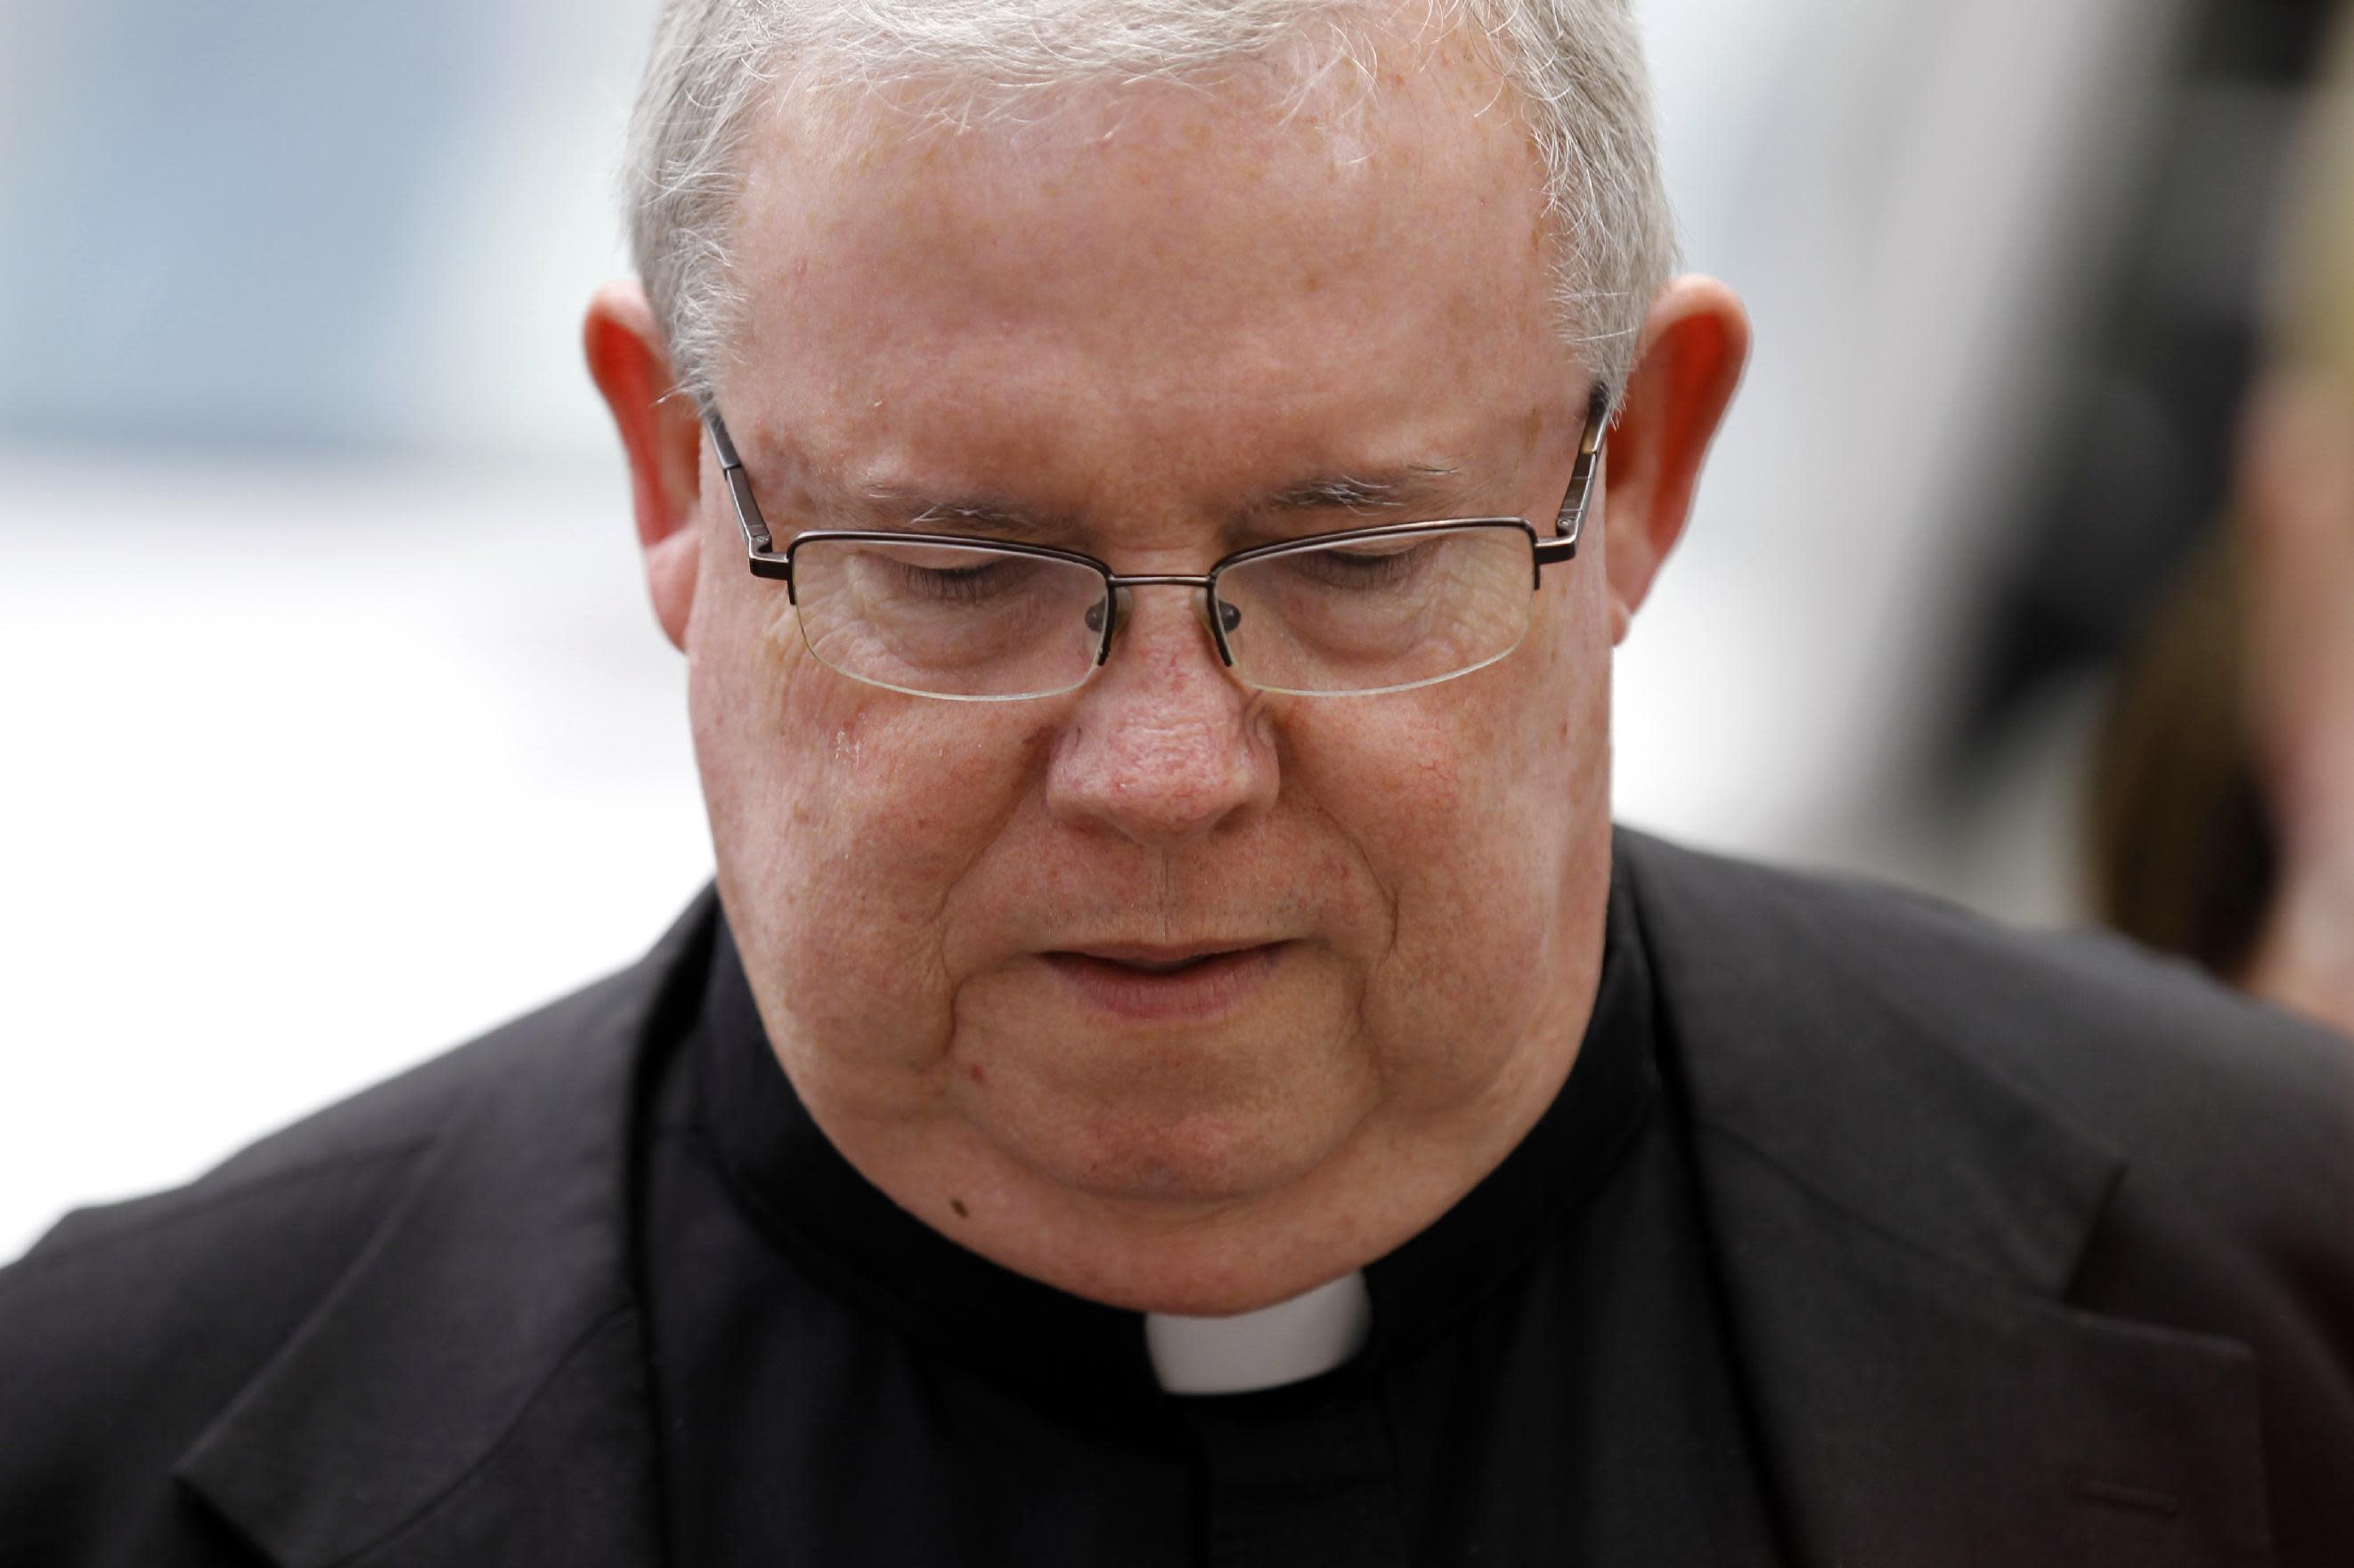 Philly monsignor awaits fate in church cover-up